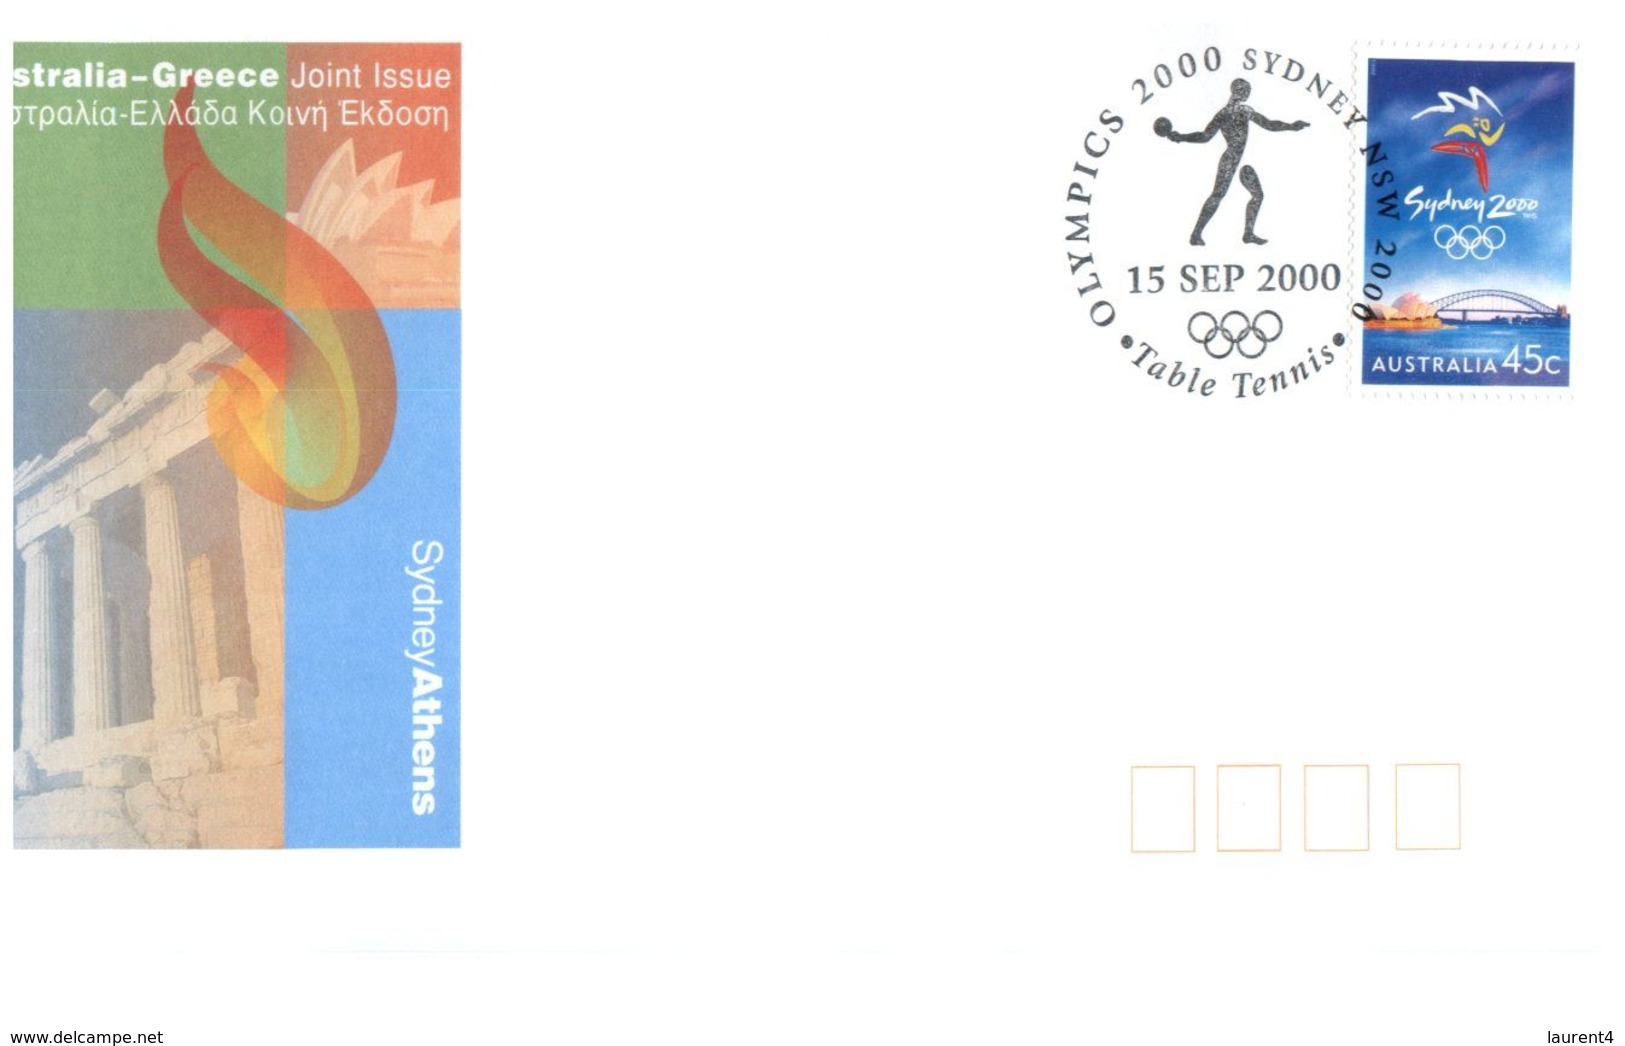 (C 4) Australia - 200 Olympic Games - set of 12 sports cancelled on 15 September 2000